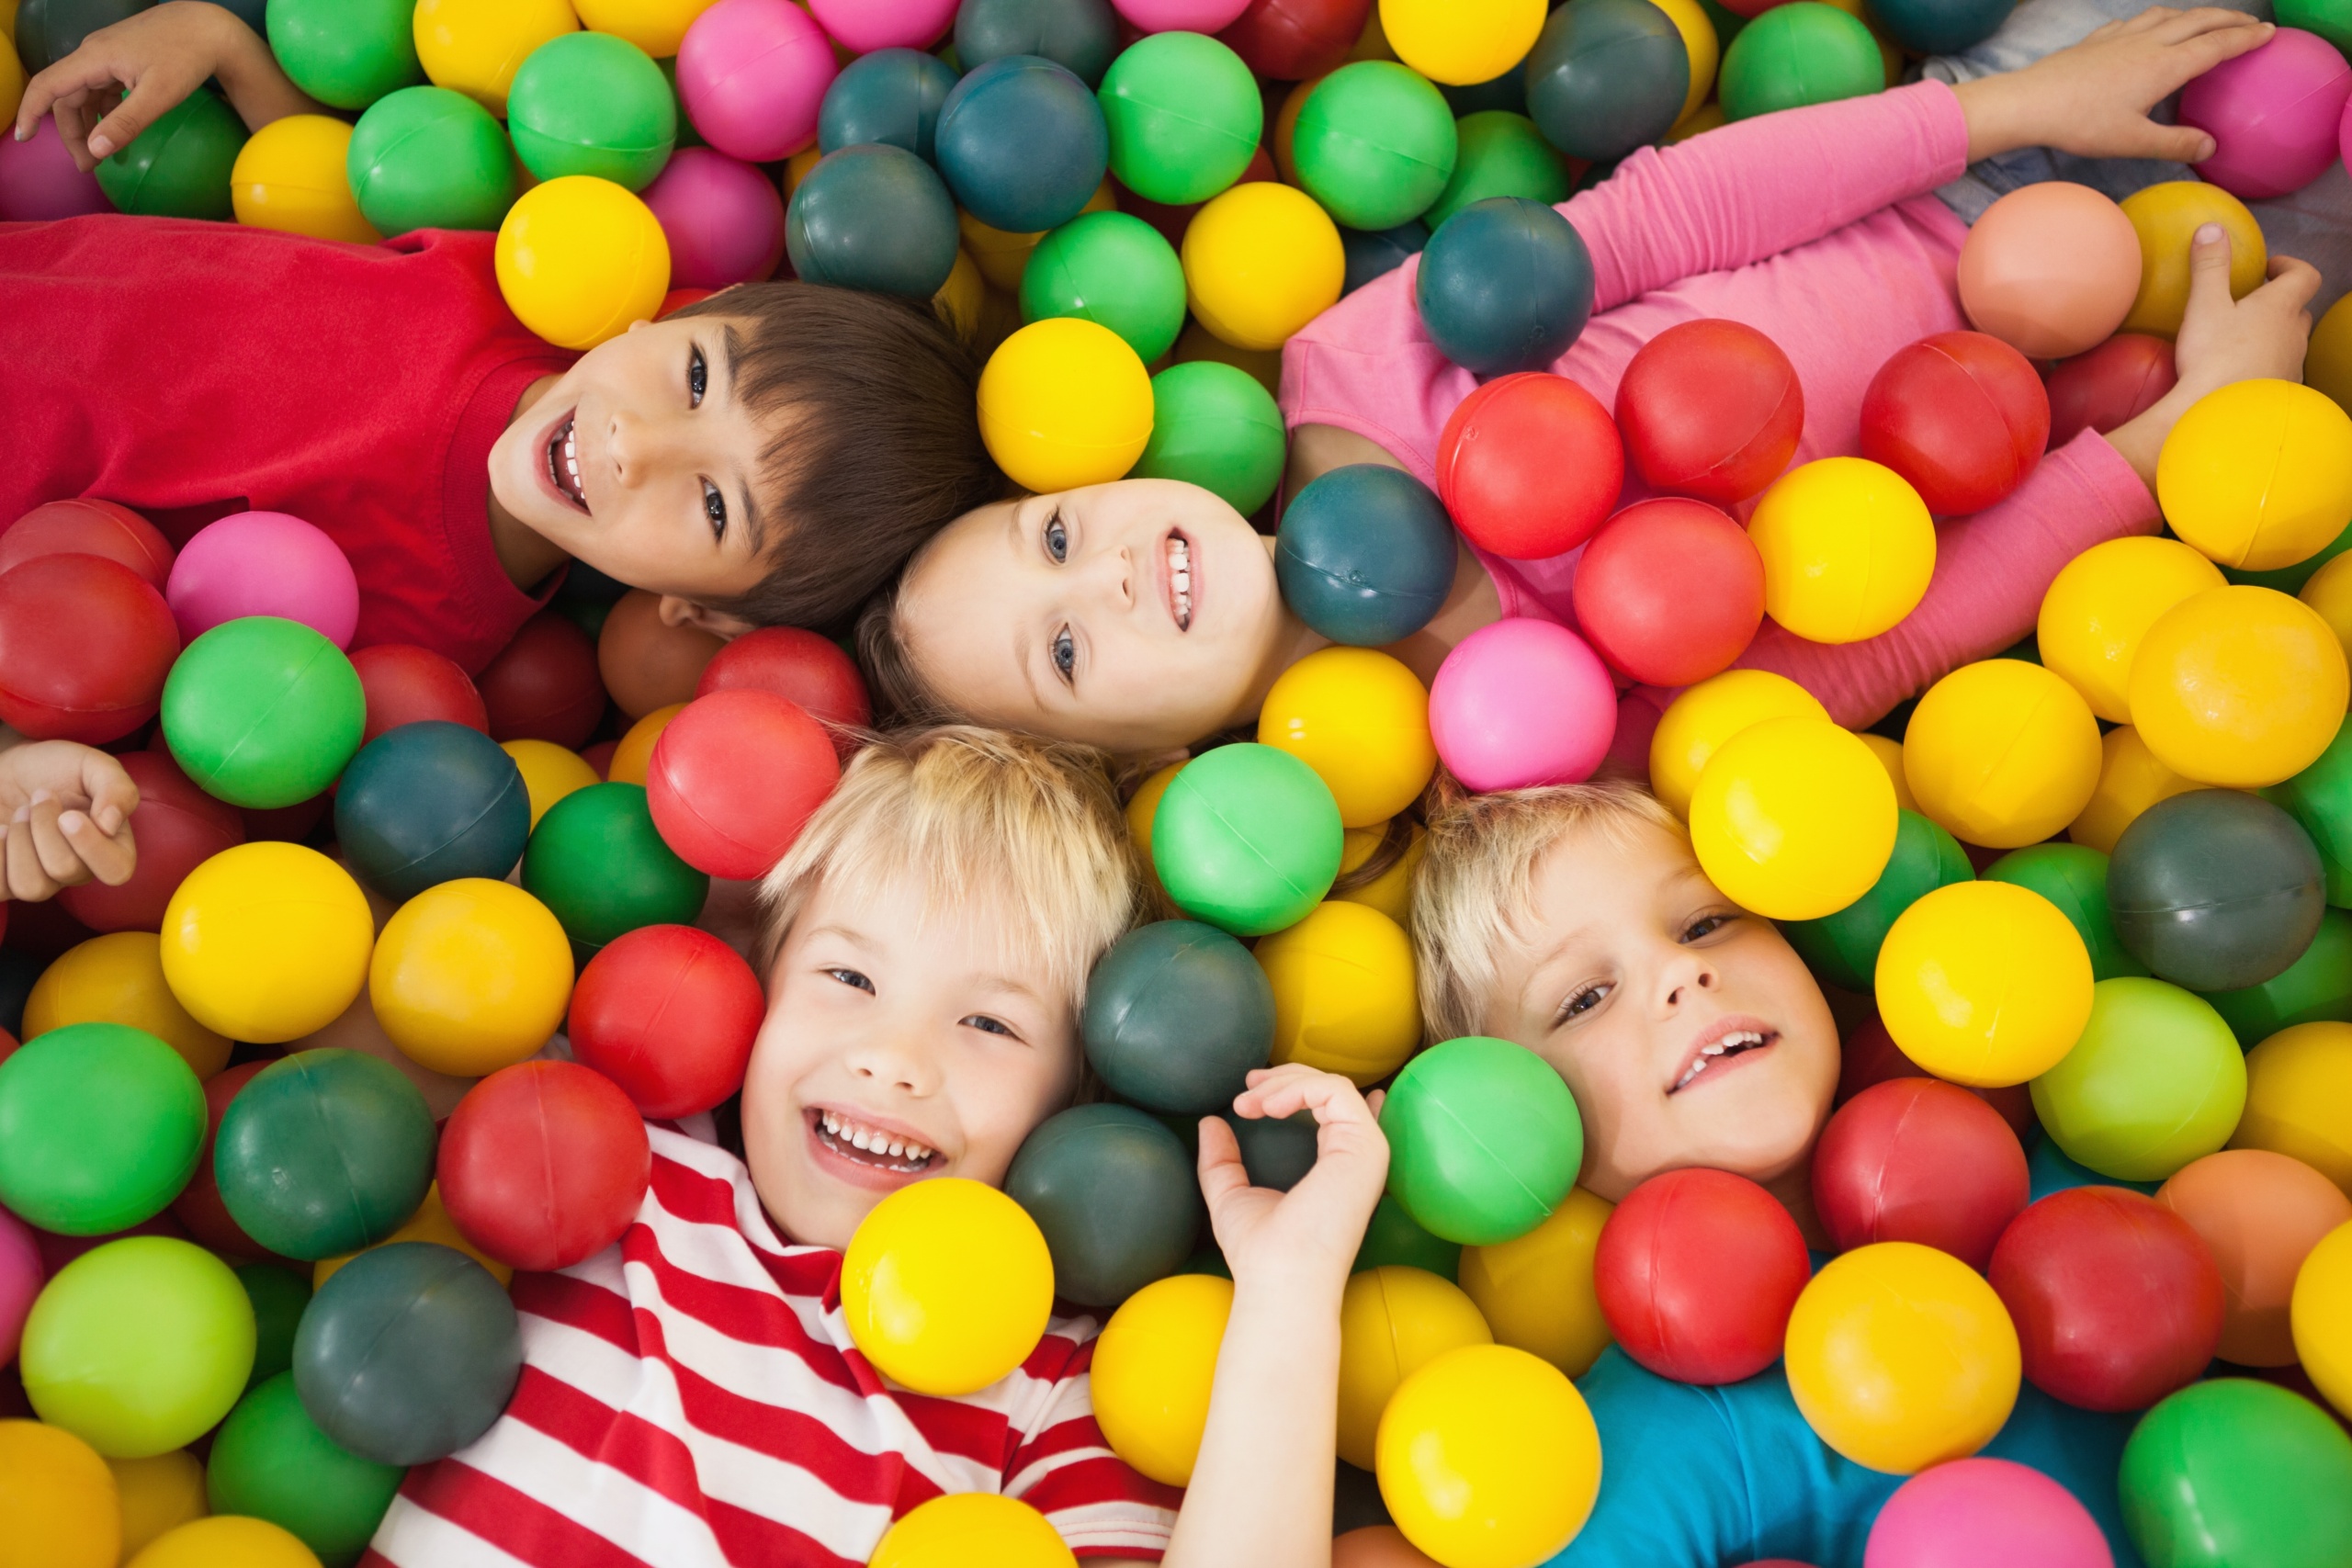 Updates on the revision of the EU Toy Safety Directive